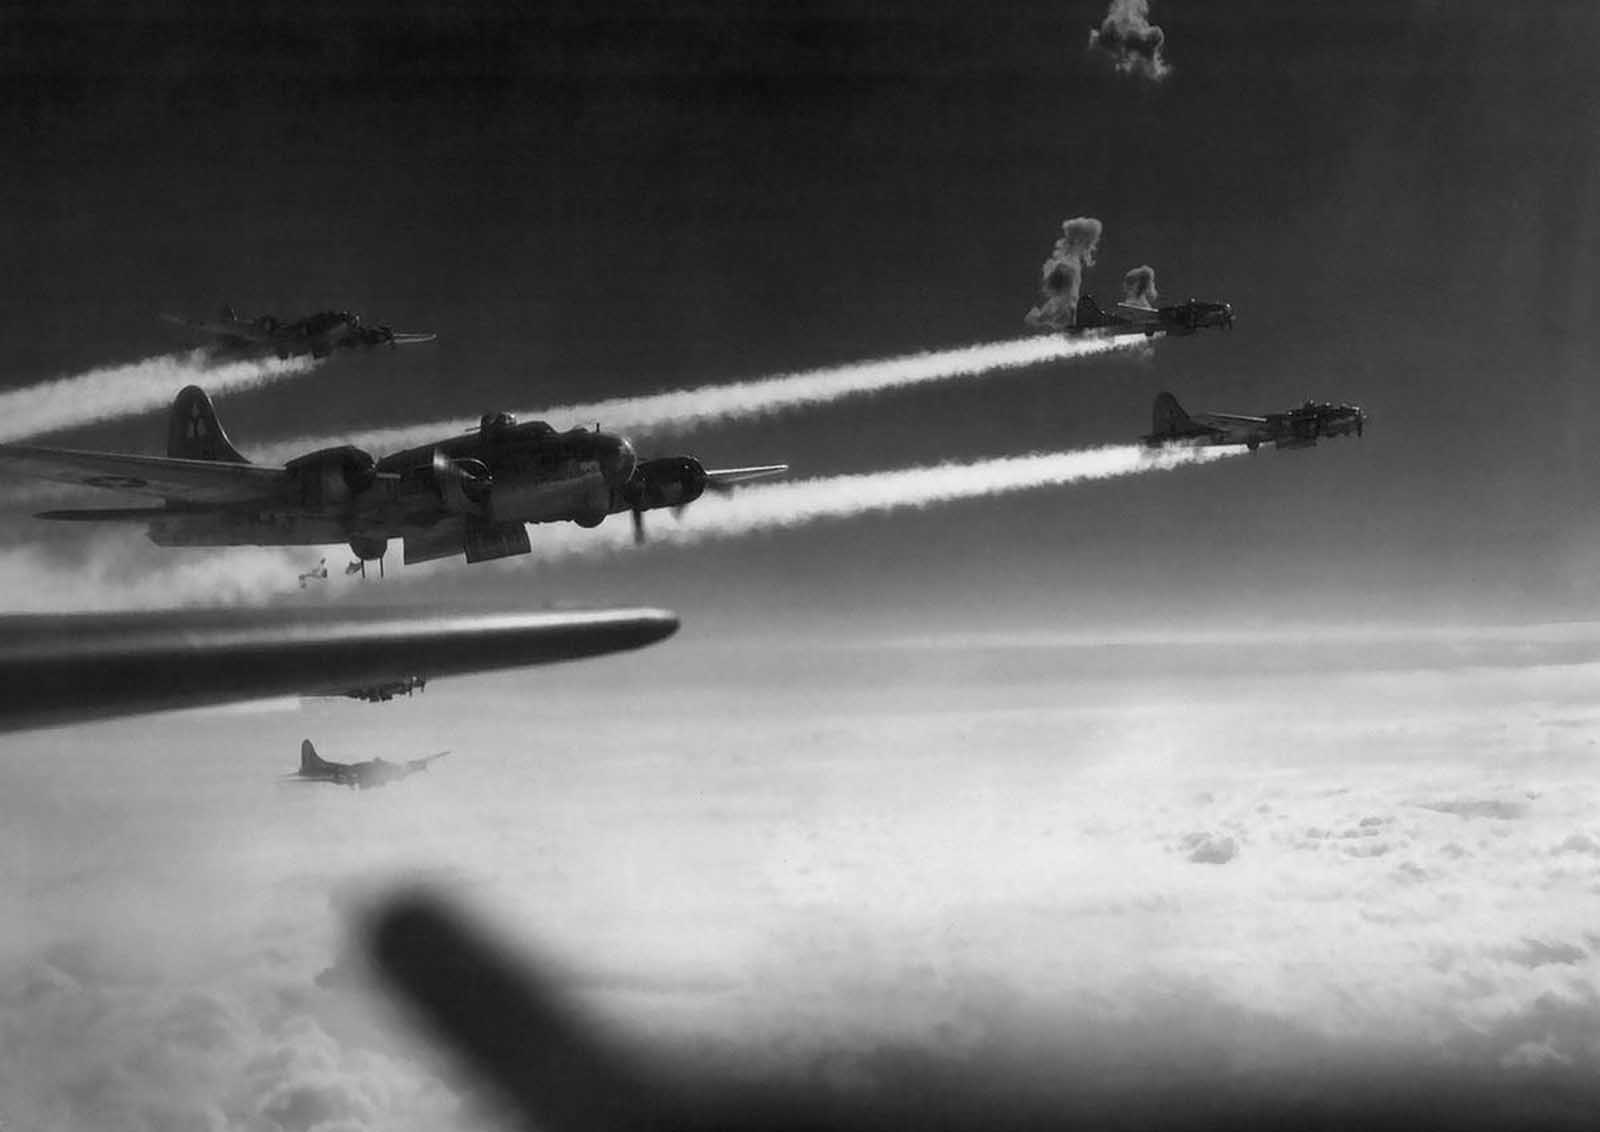 Flak bursts through the vapor trails from B-17 flying fortresses of the 15th air force during the attack on the rail yards at Graz, Austria, on March 3, 1945.